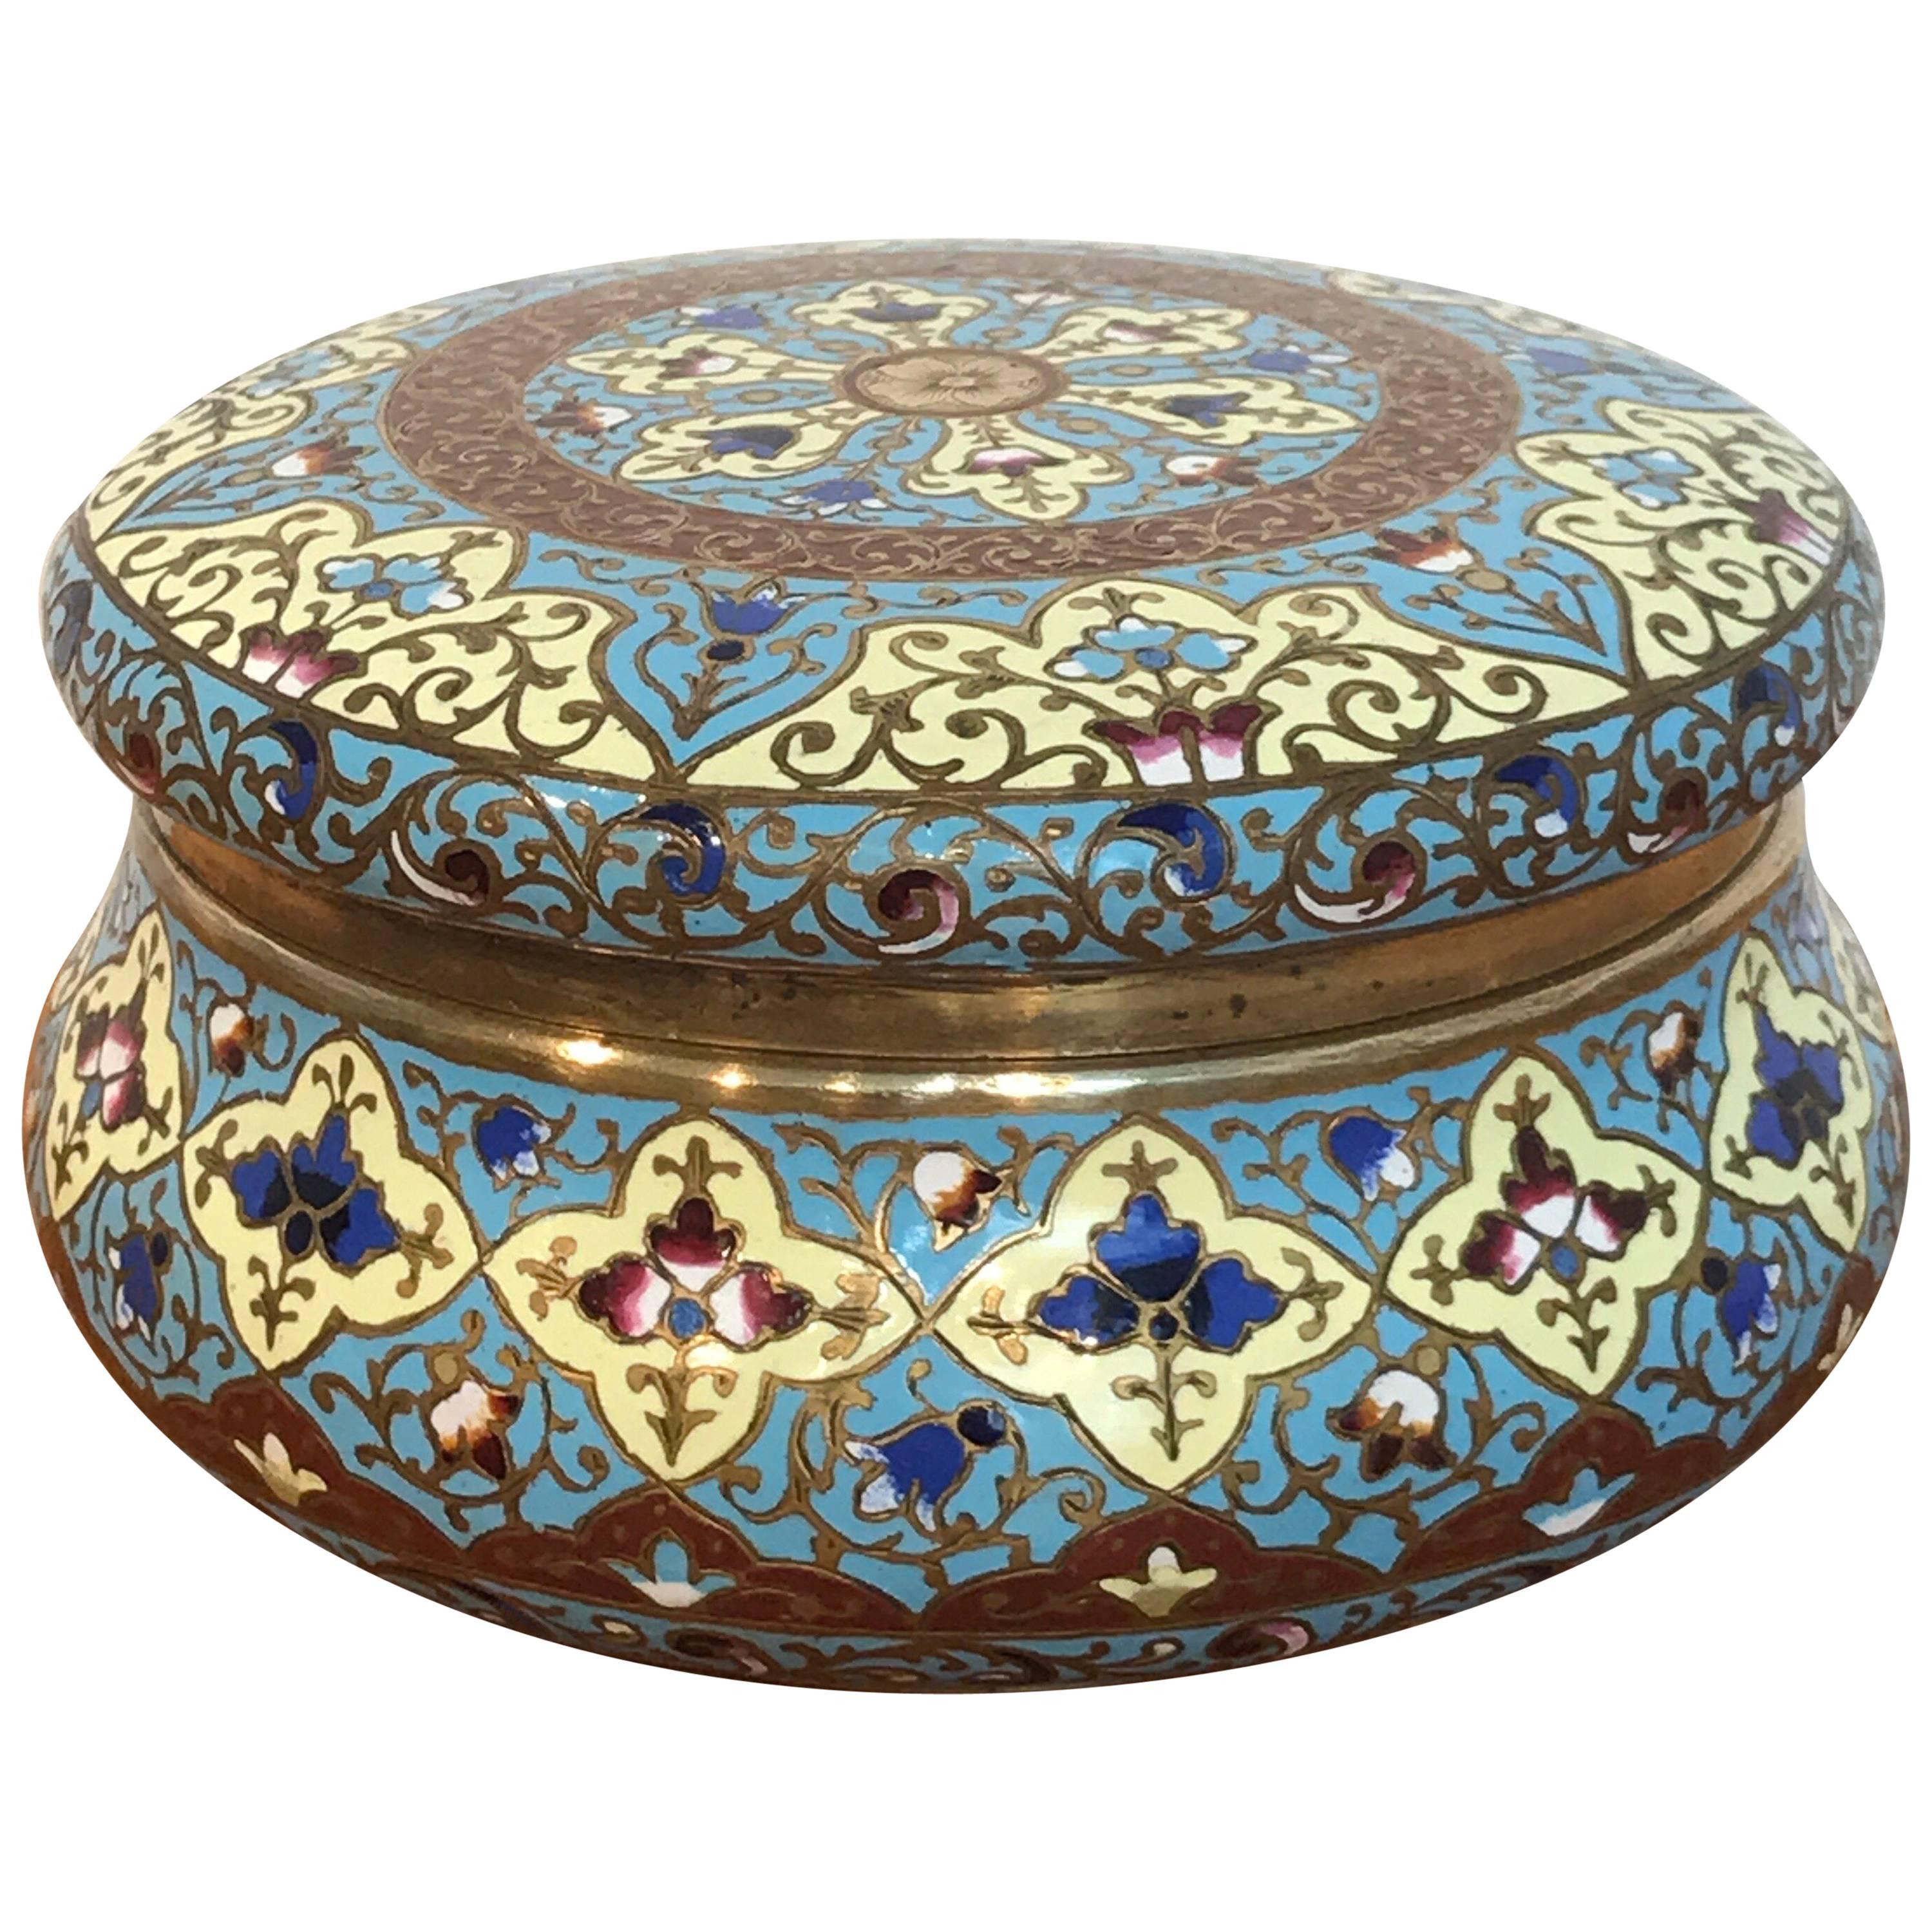 French Enamel Table Box, Attributed to F. Barbedienne